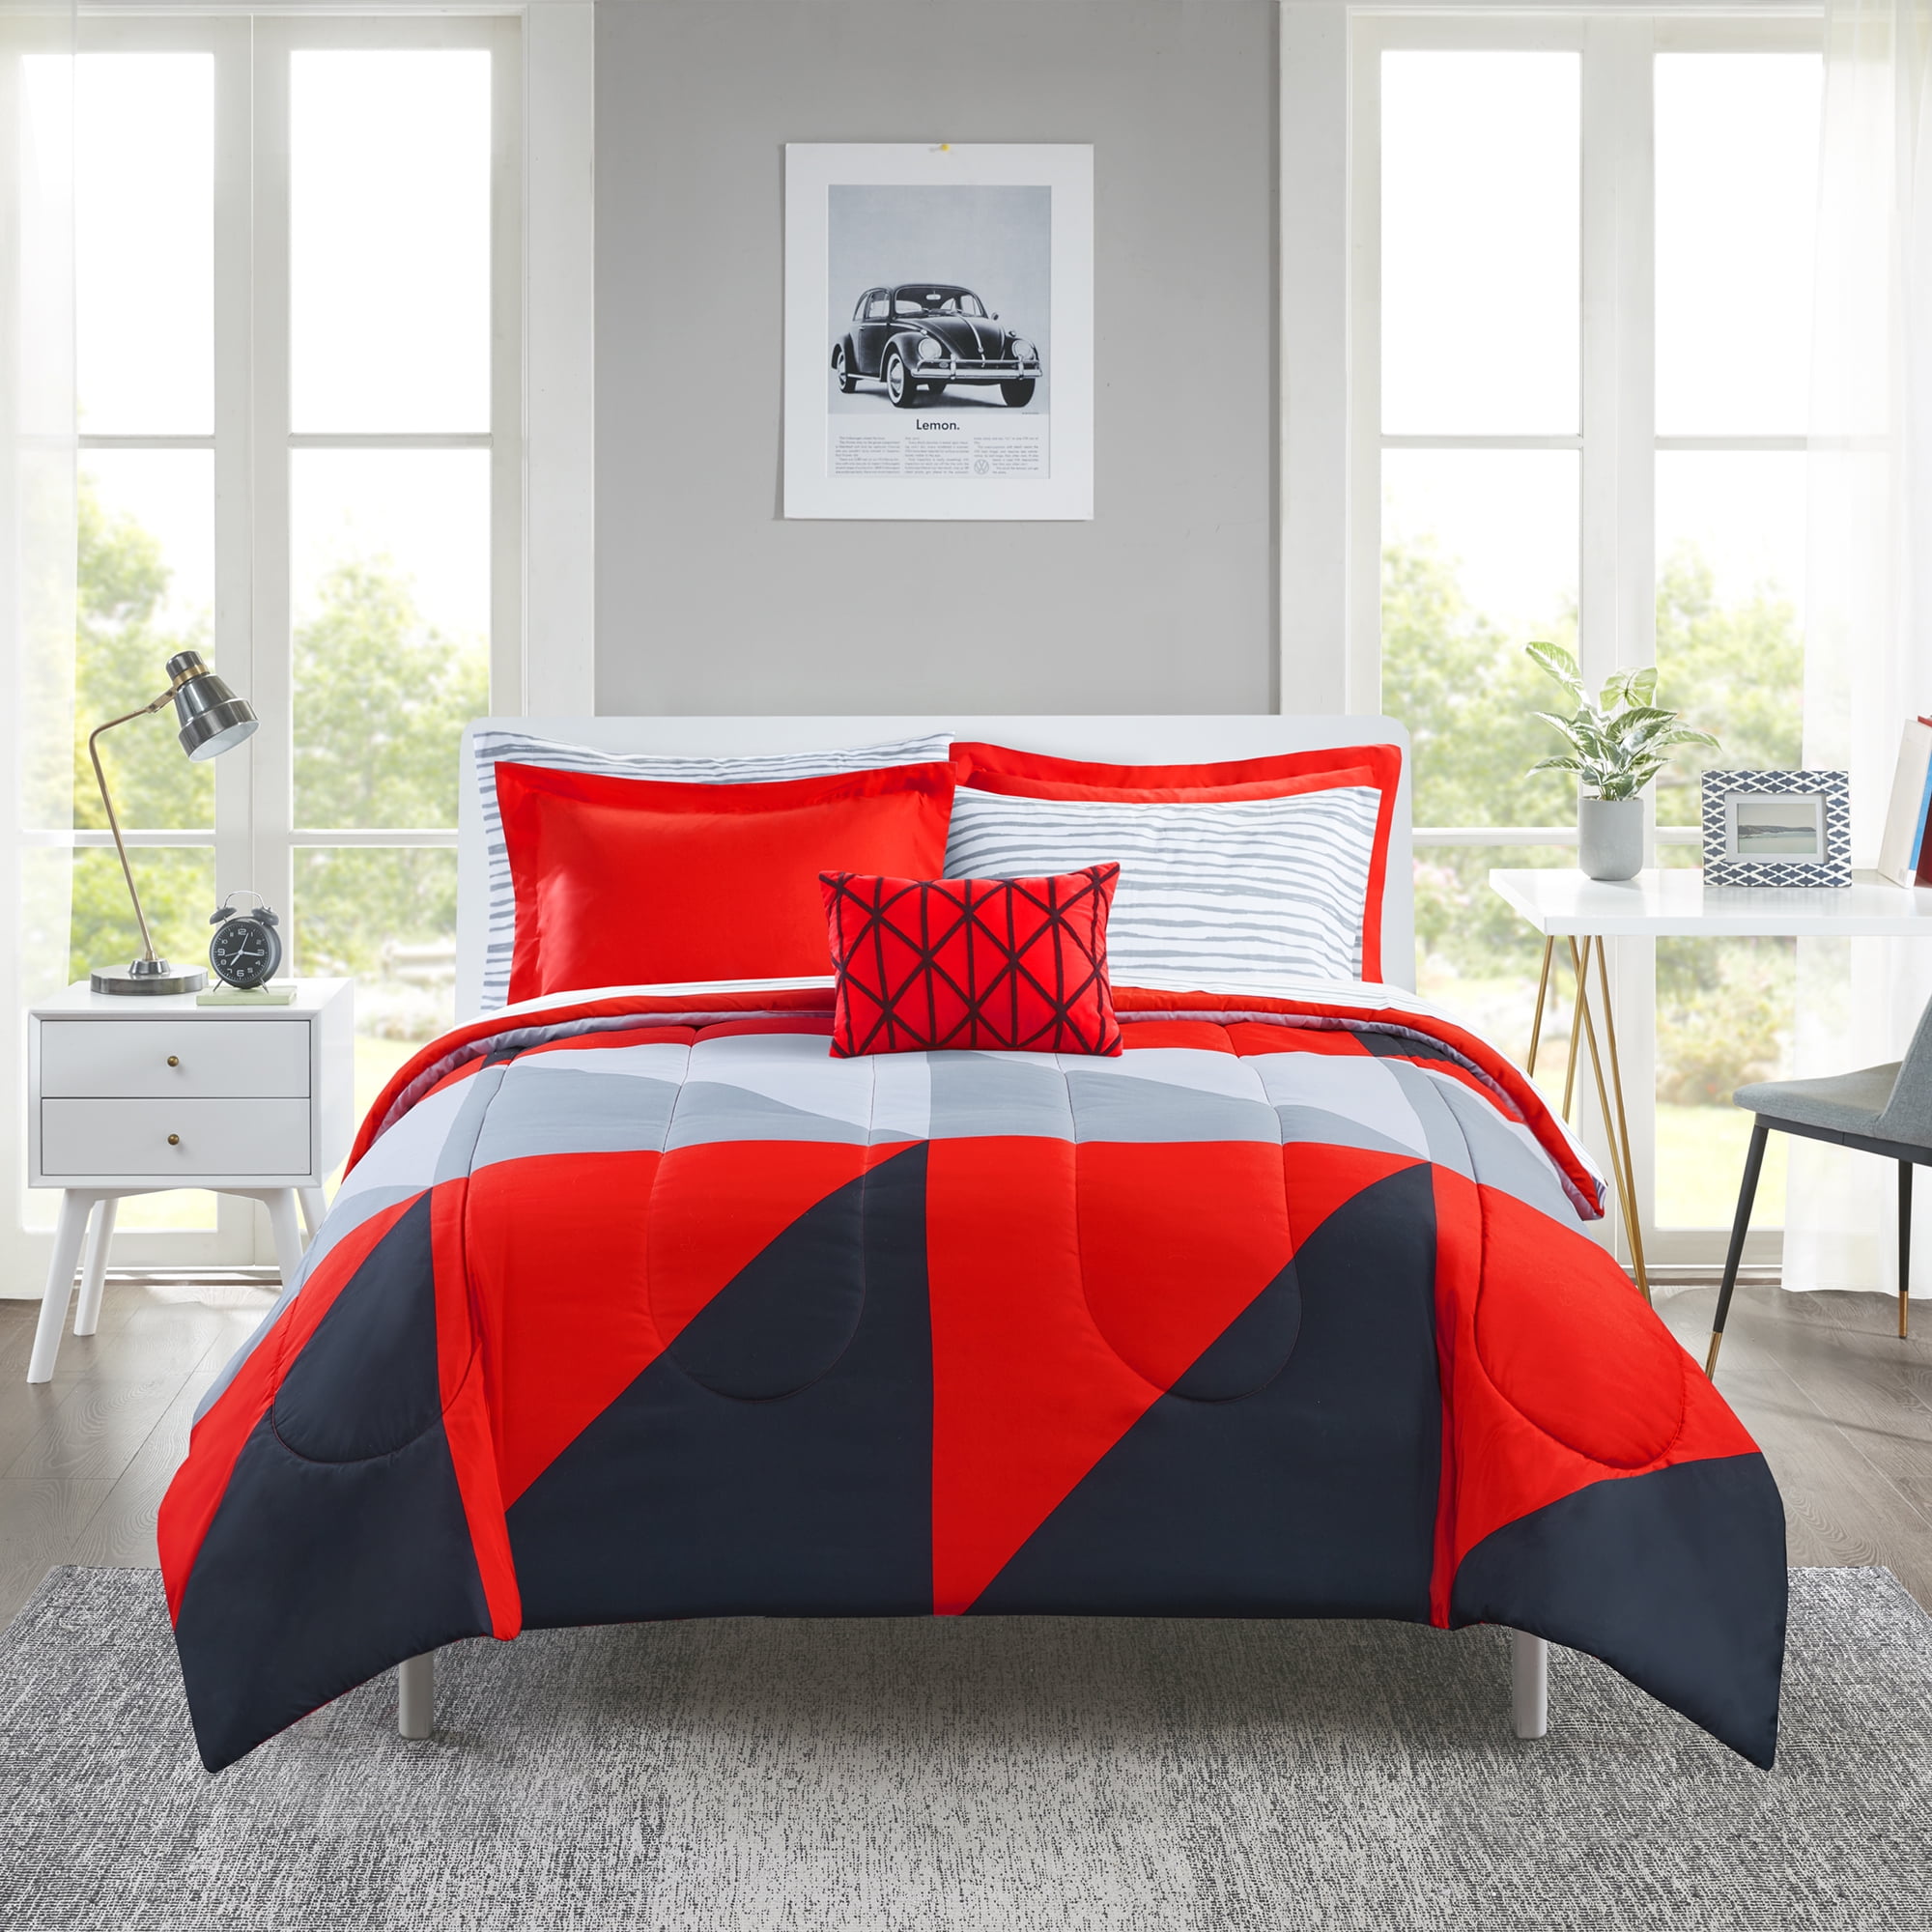 Red Black Multi Size Comforter Set 10 Piece Sheets Bed Pillows Shams Bedroom NEW 